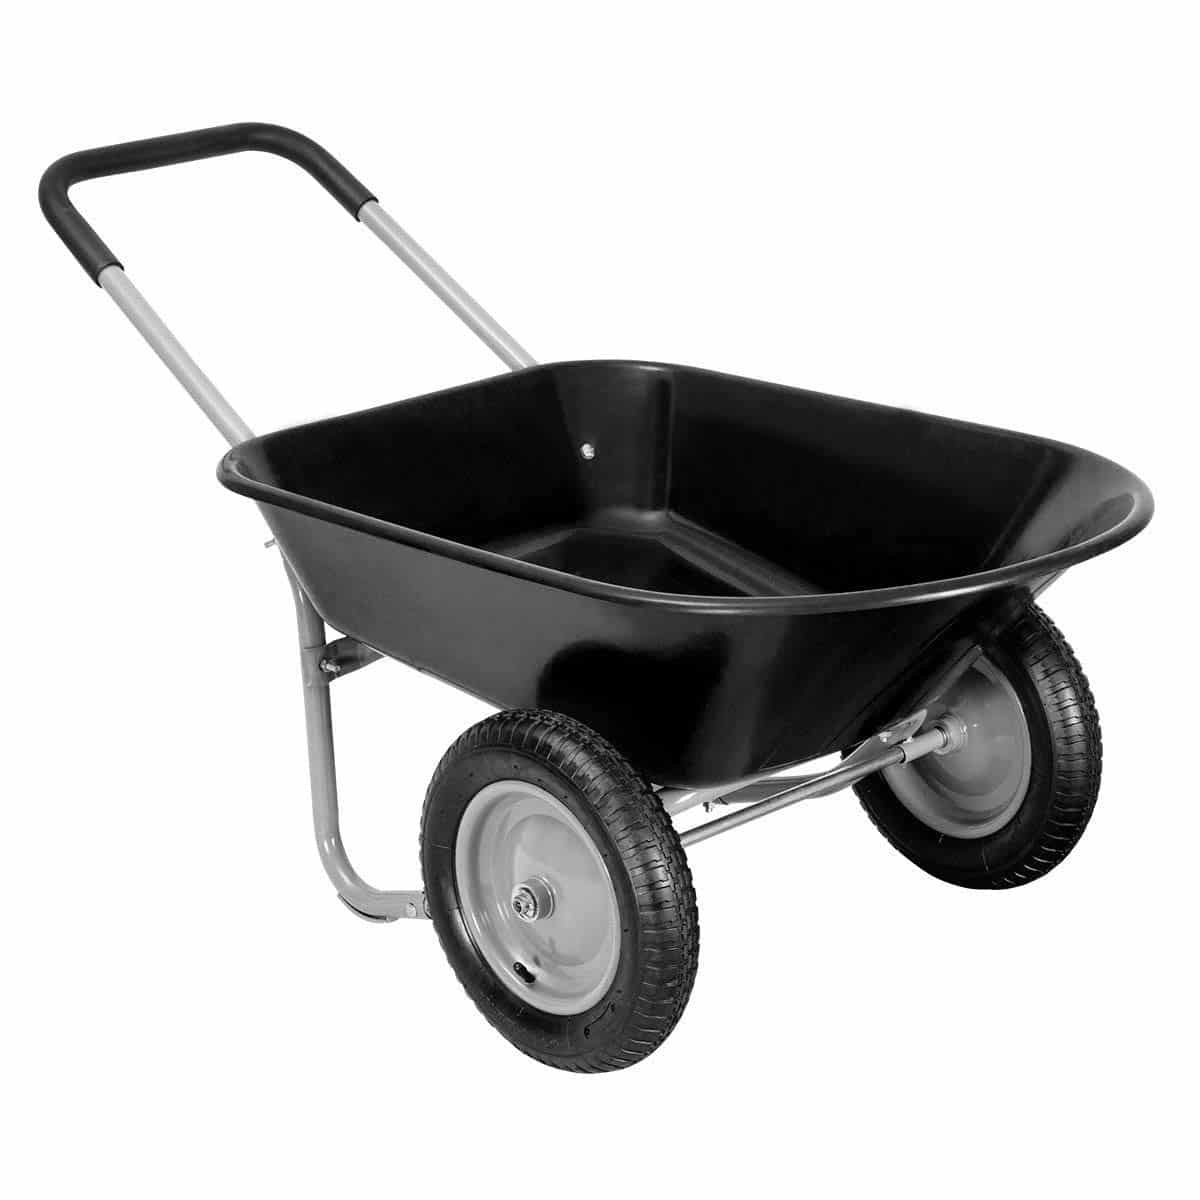 Top 10 Best 2 Wheel Wheelbarrows in 2021 Reviews - Go On Products